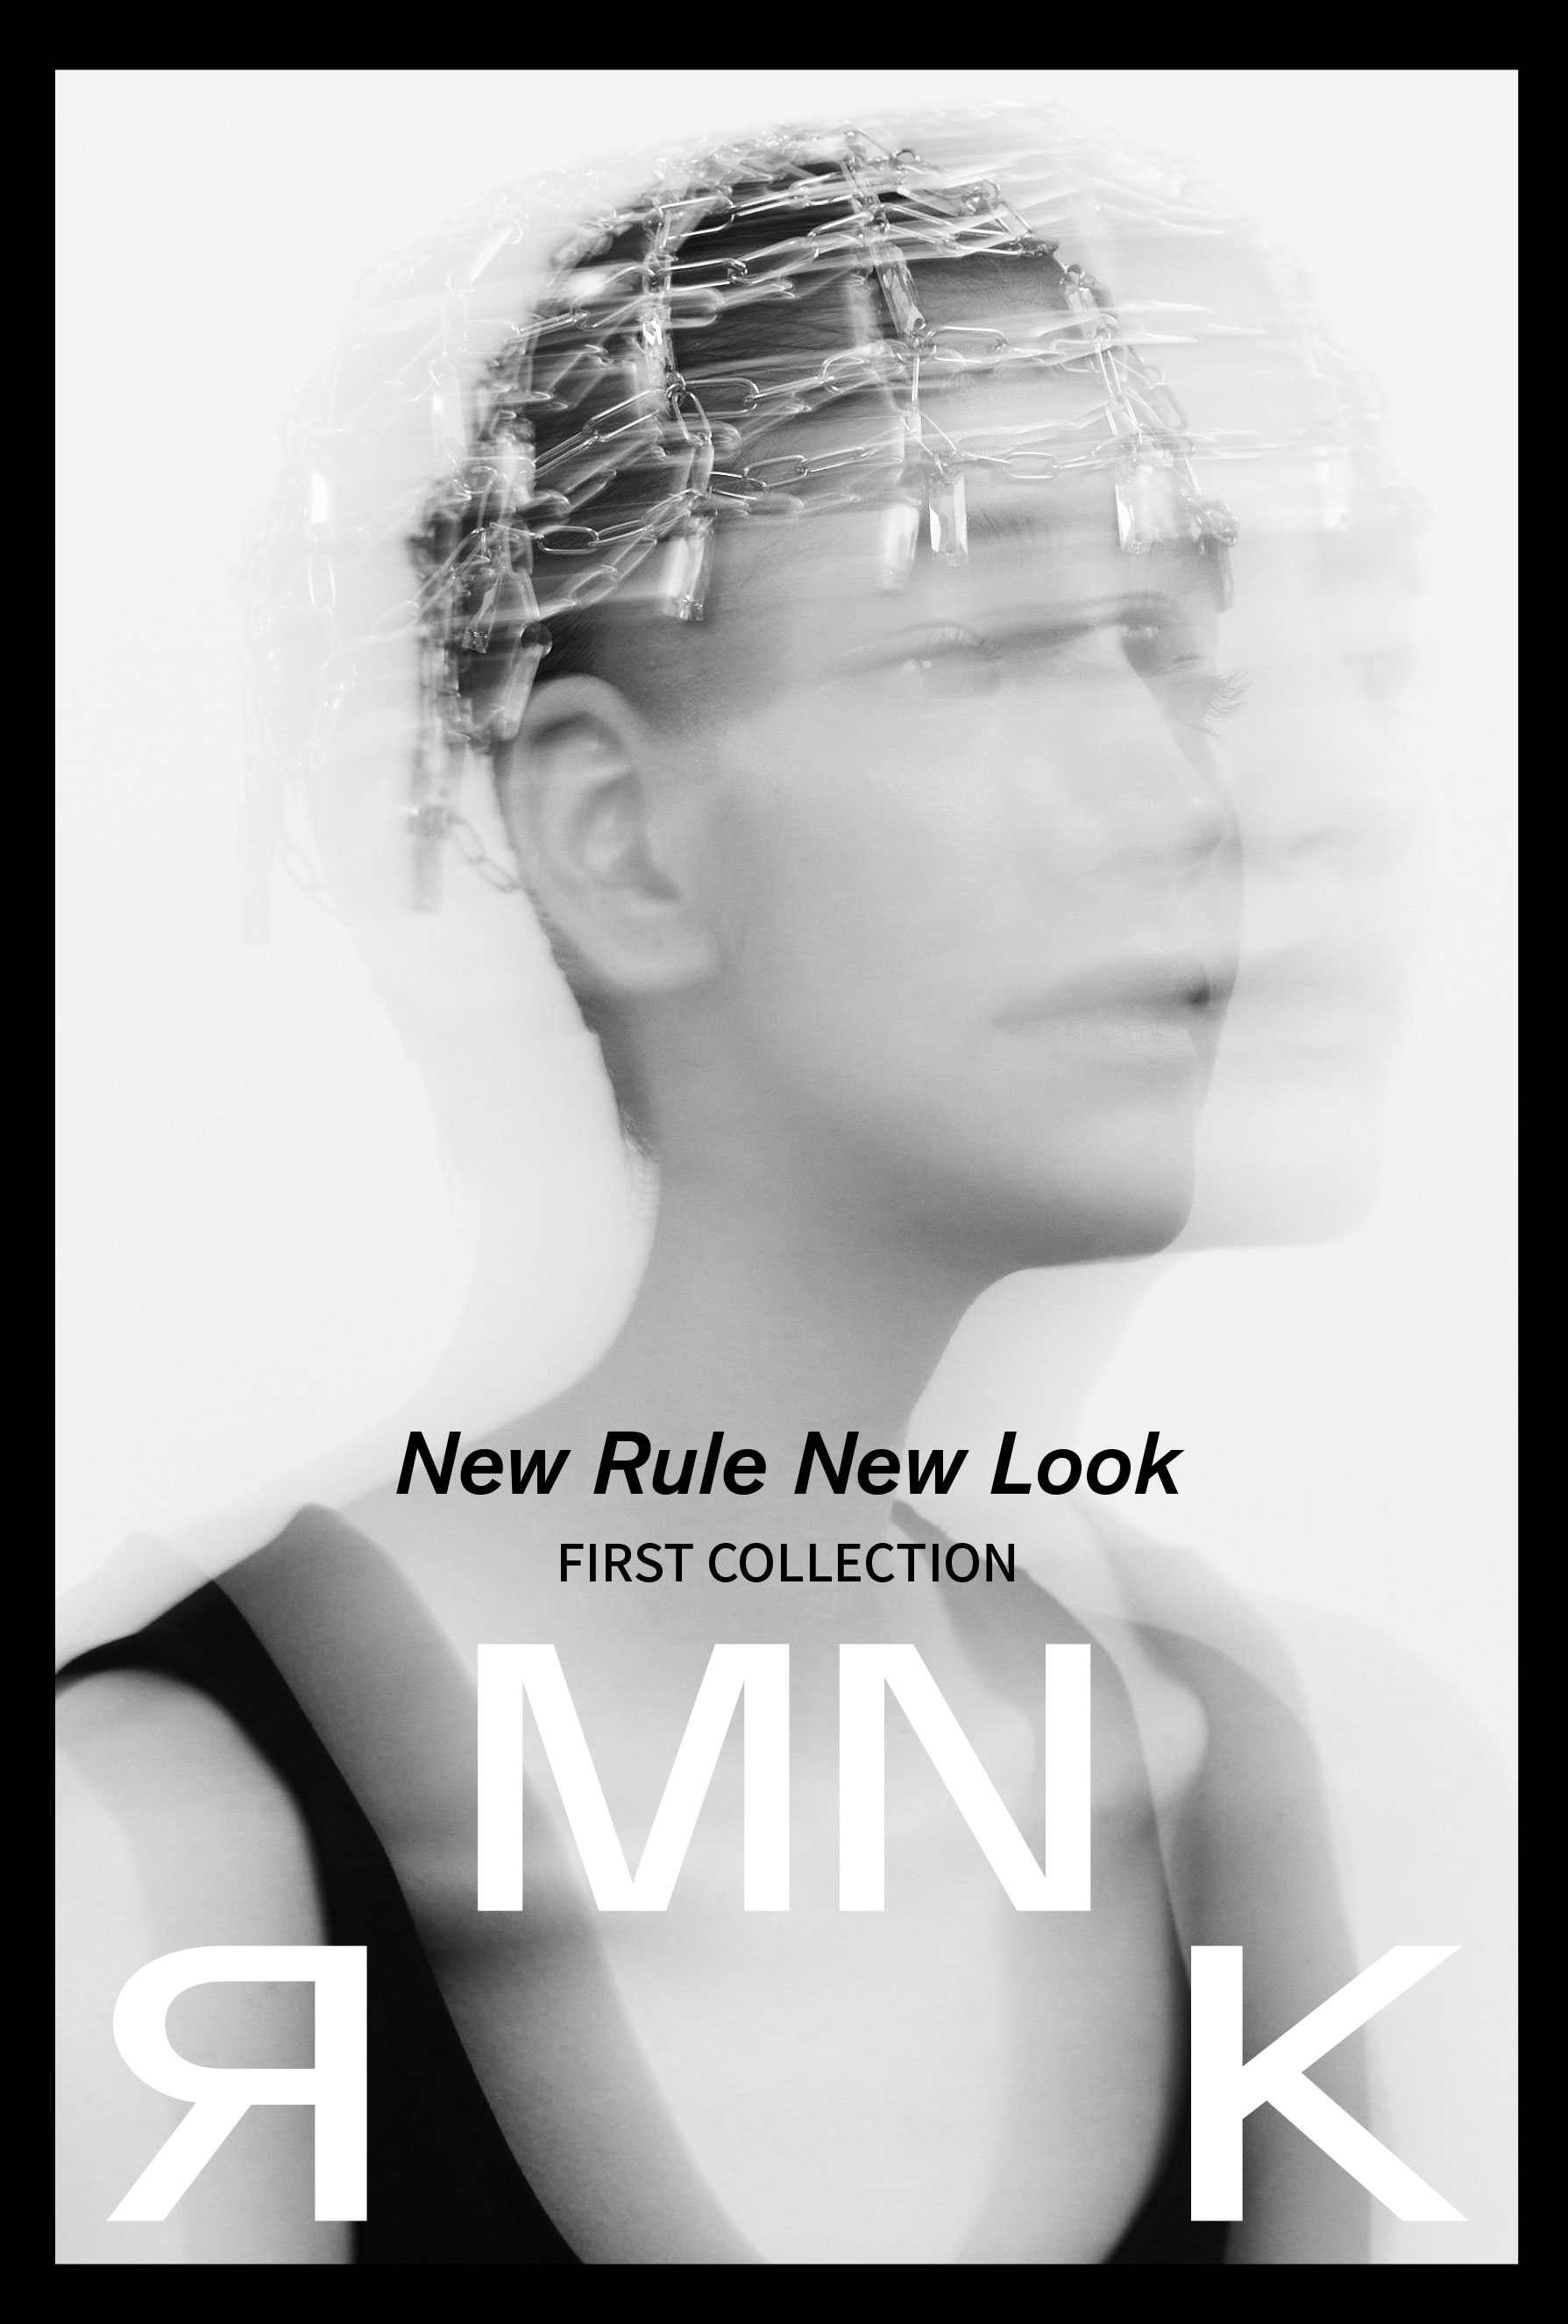 NEW RULE NEW LOOK